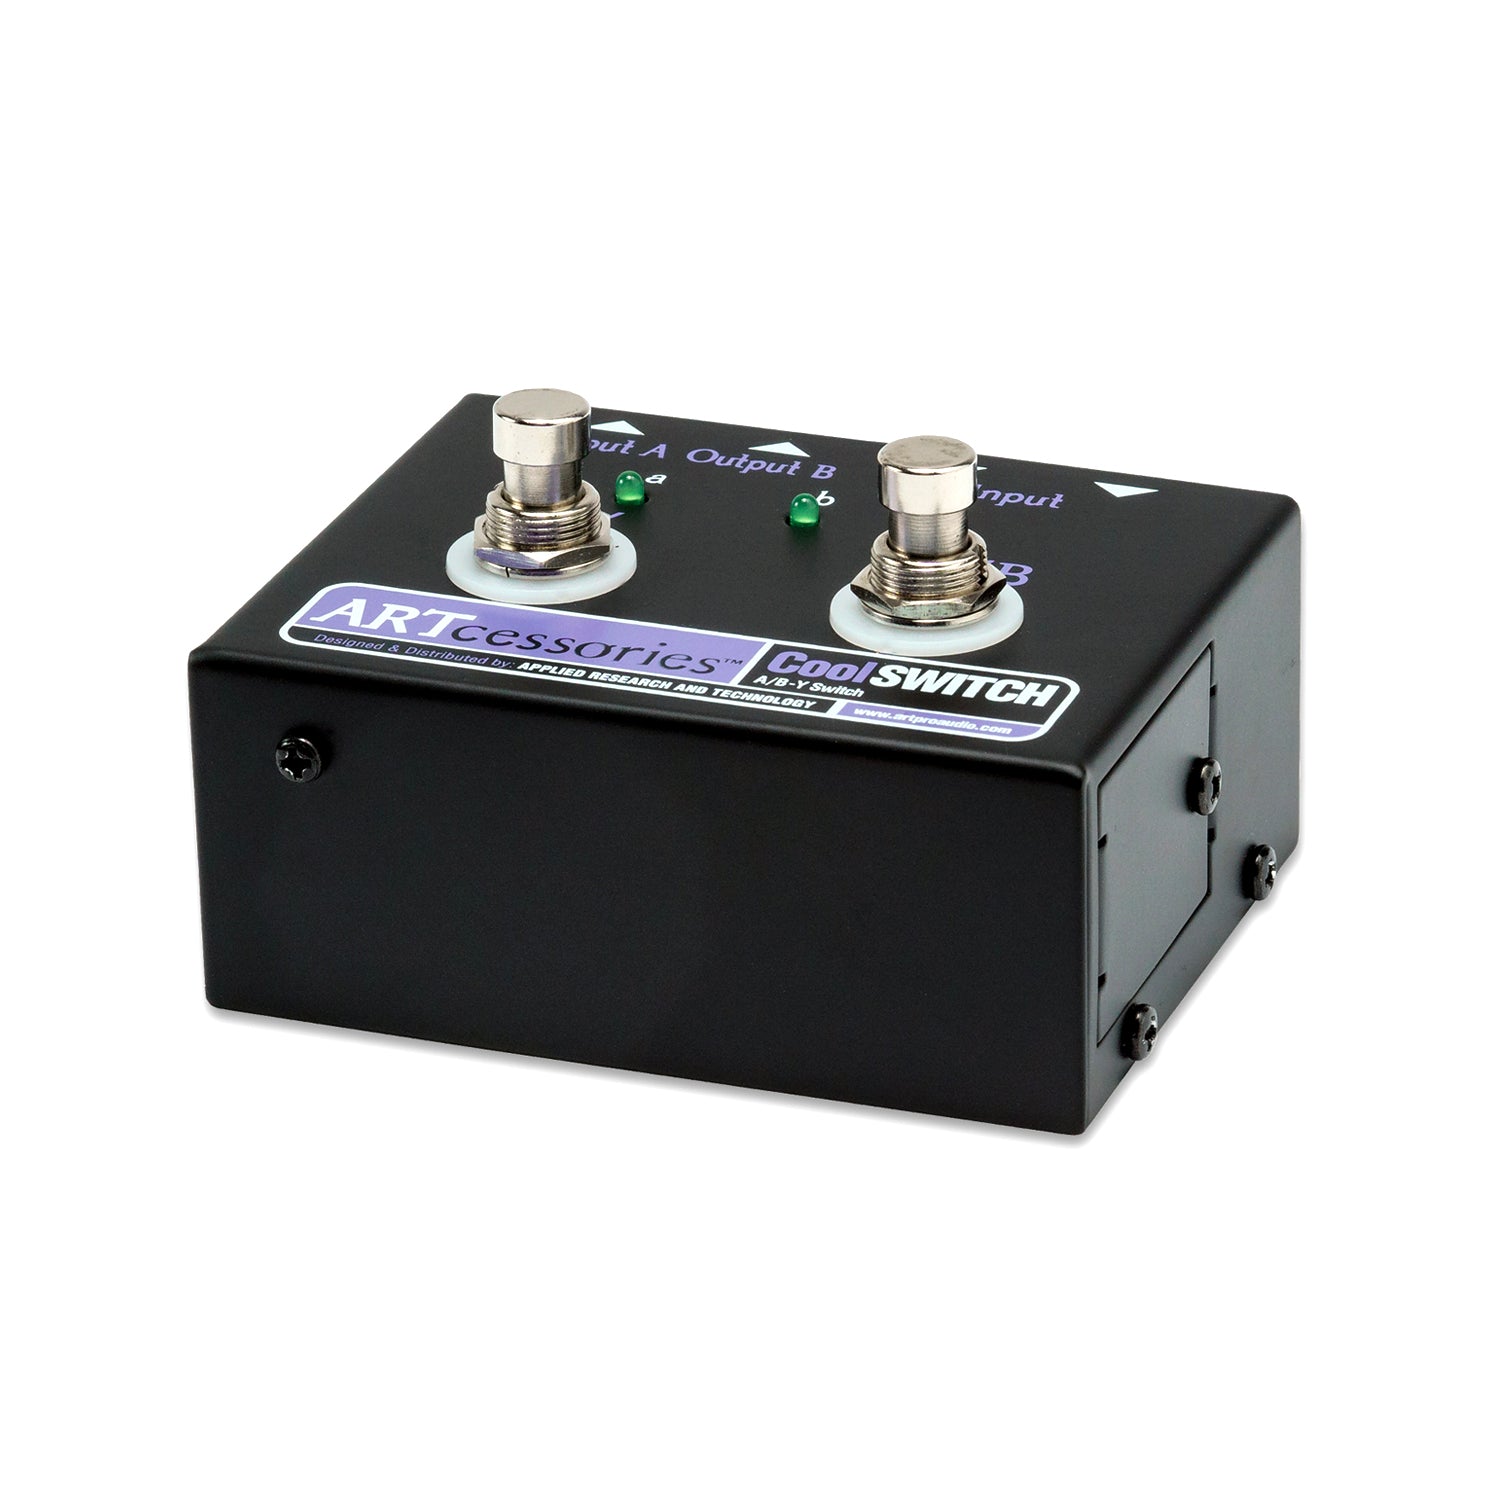 ART CoolSwitch A/B-Y Switching Pedal